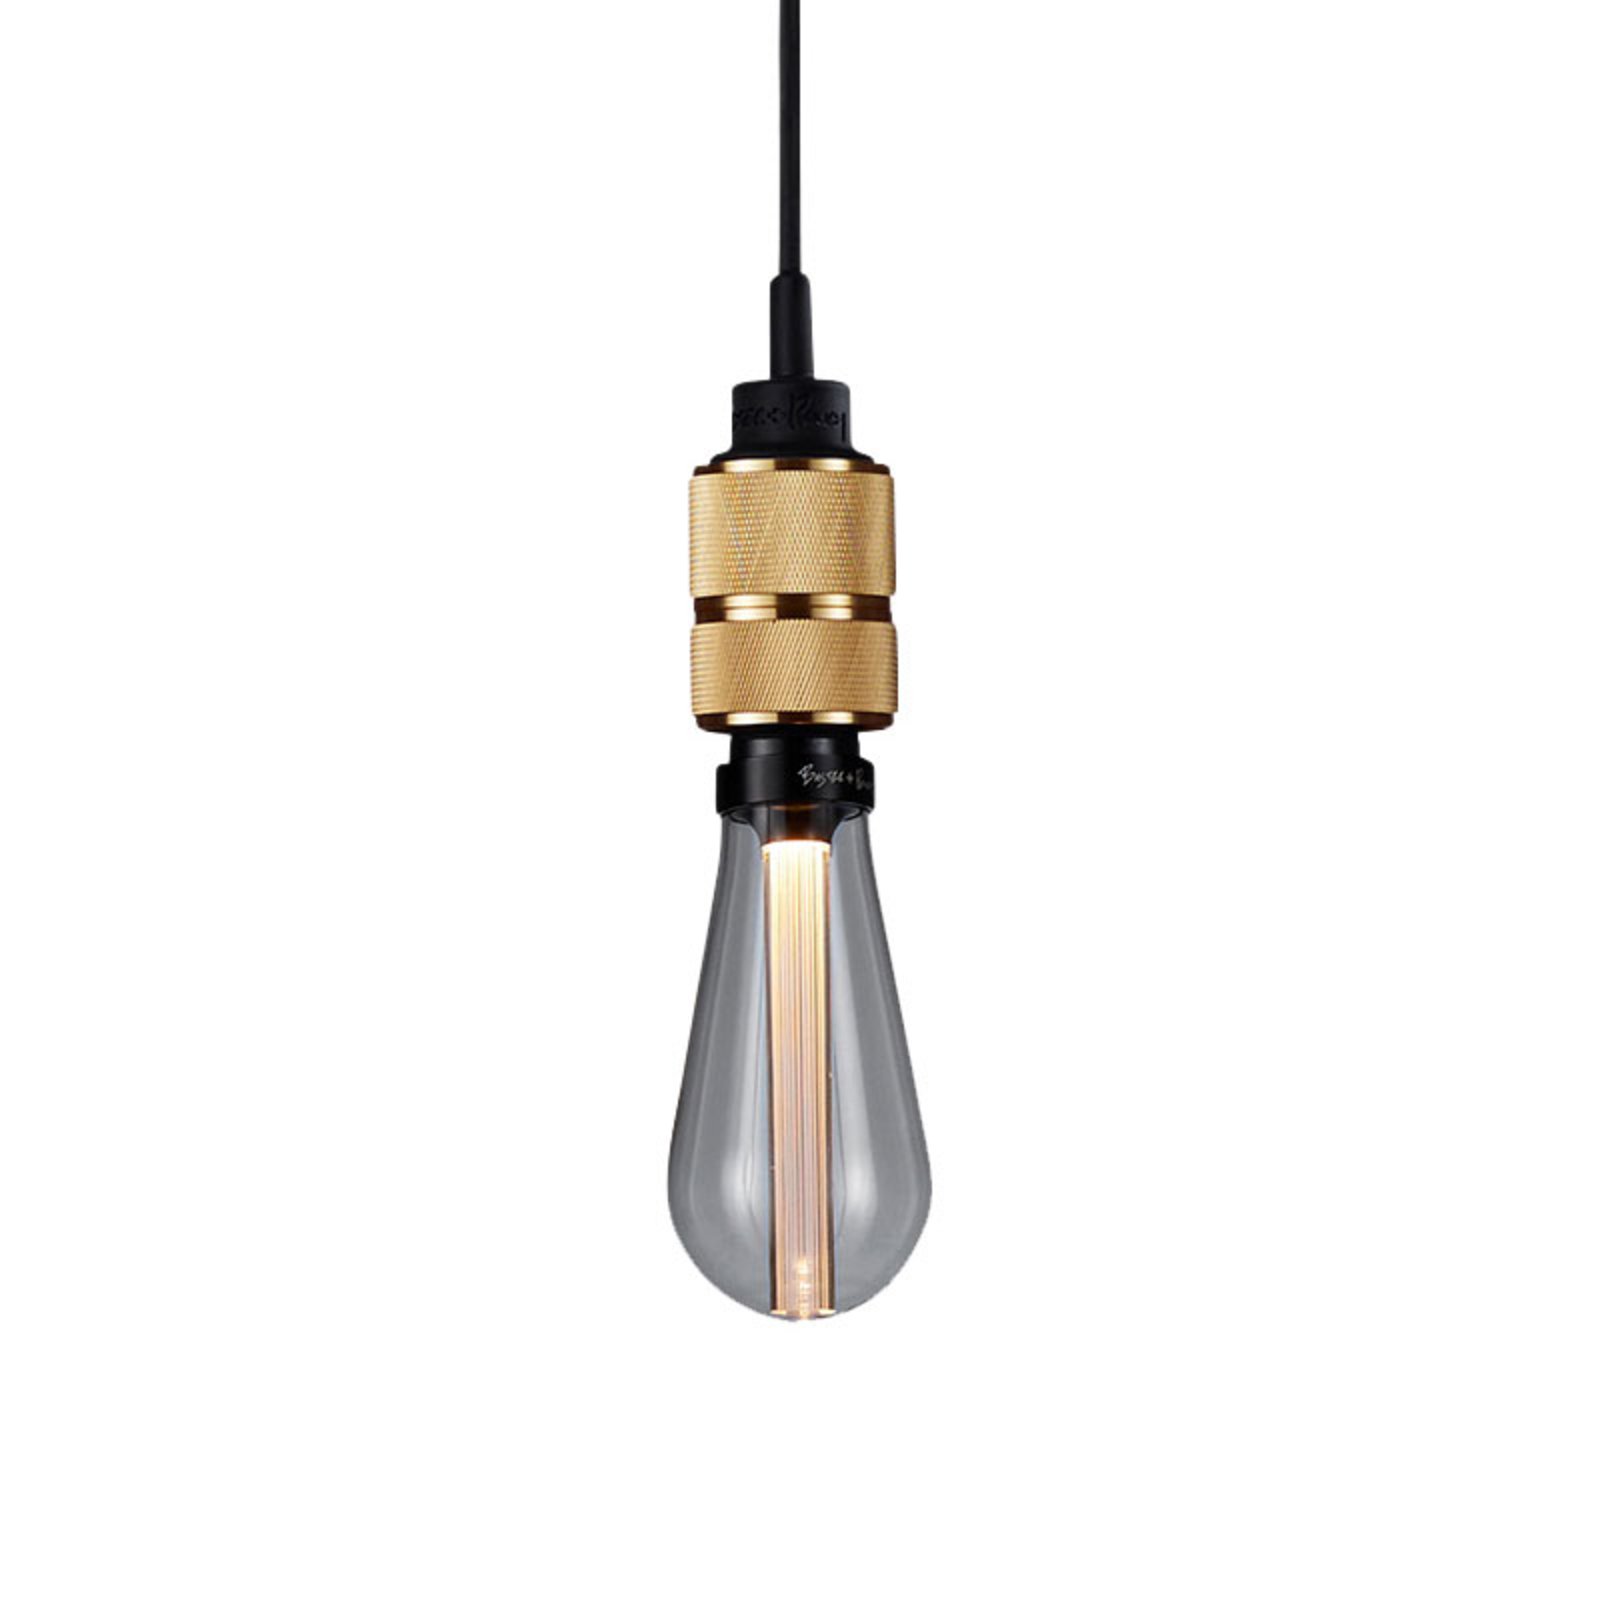 Buster + Punch Hooked 1.0 nude hanging light brass